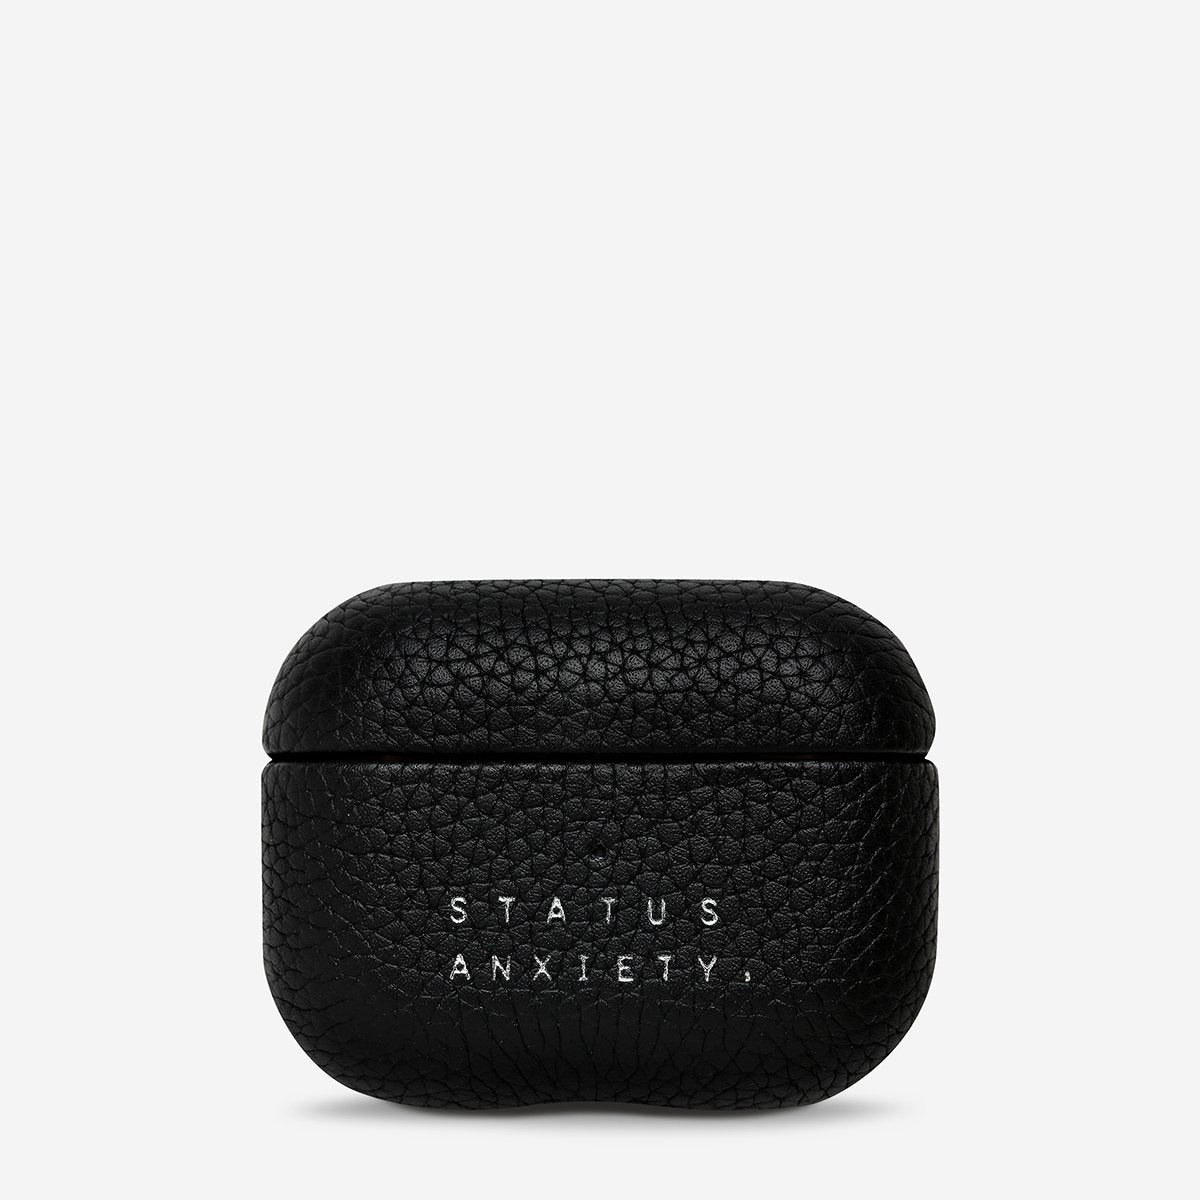 Status Anxiety Miracle Worker Black